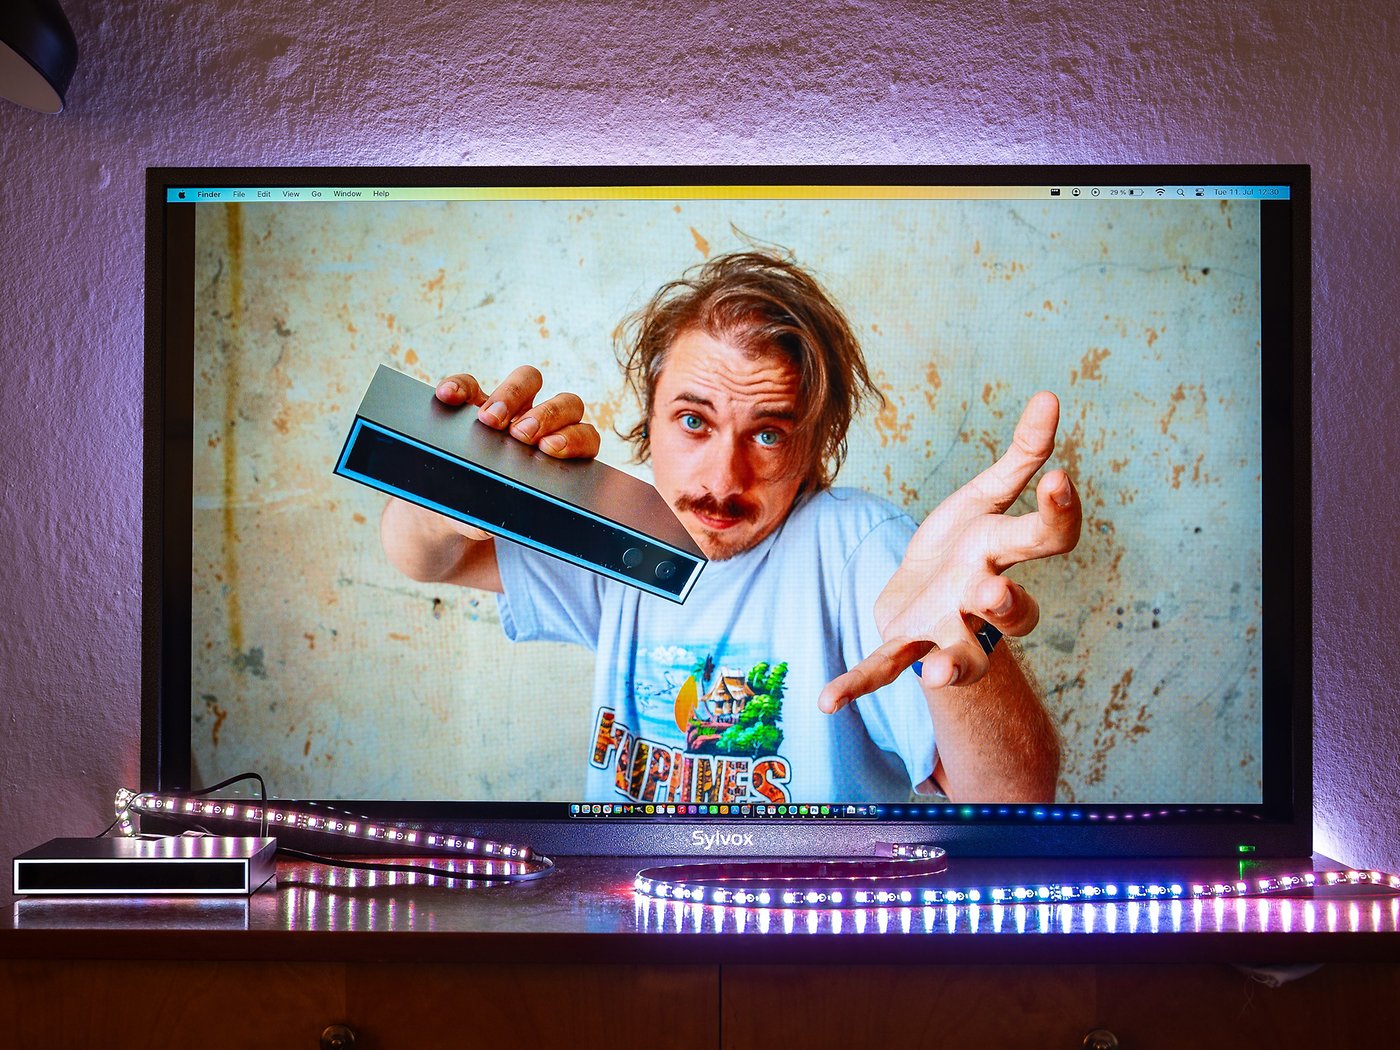 Govee TV lights are the Ambilight alternative I've been looking